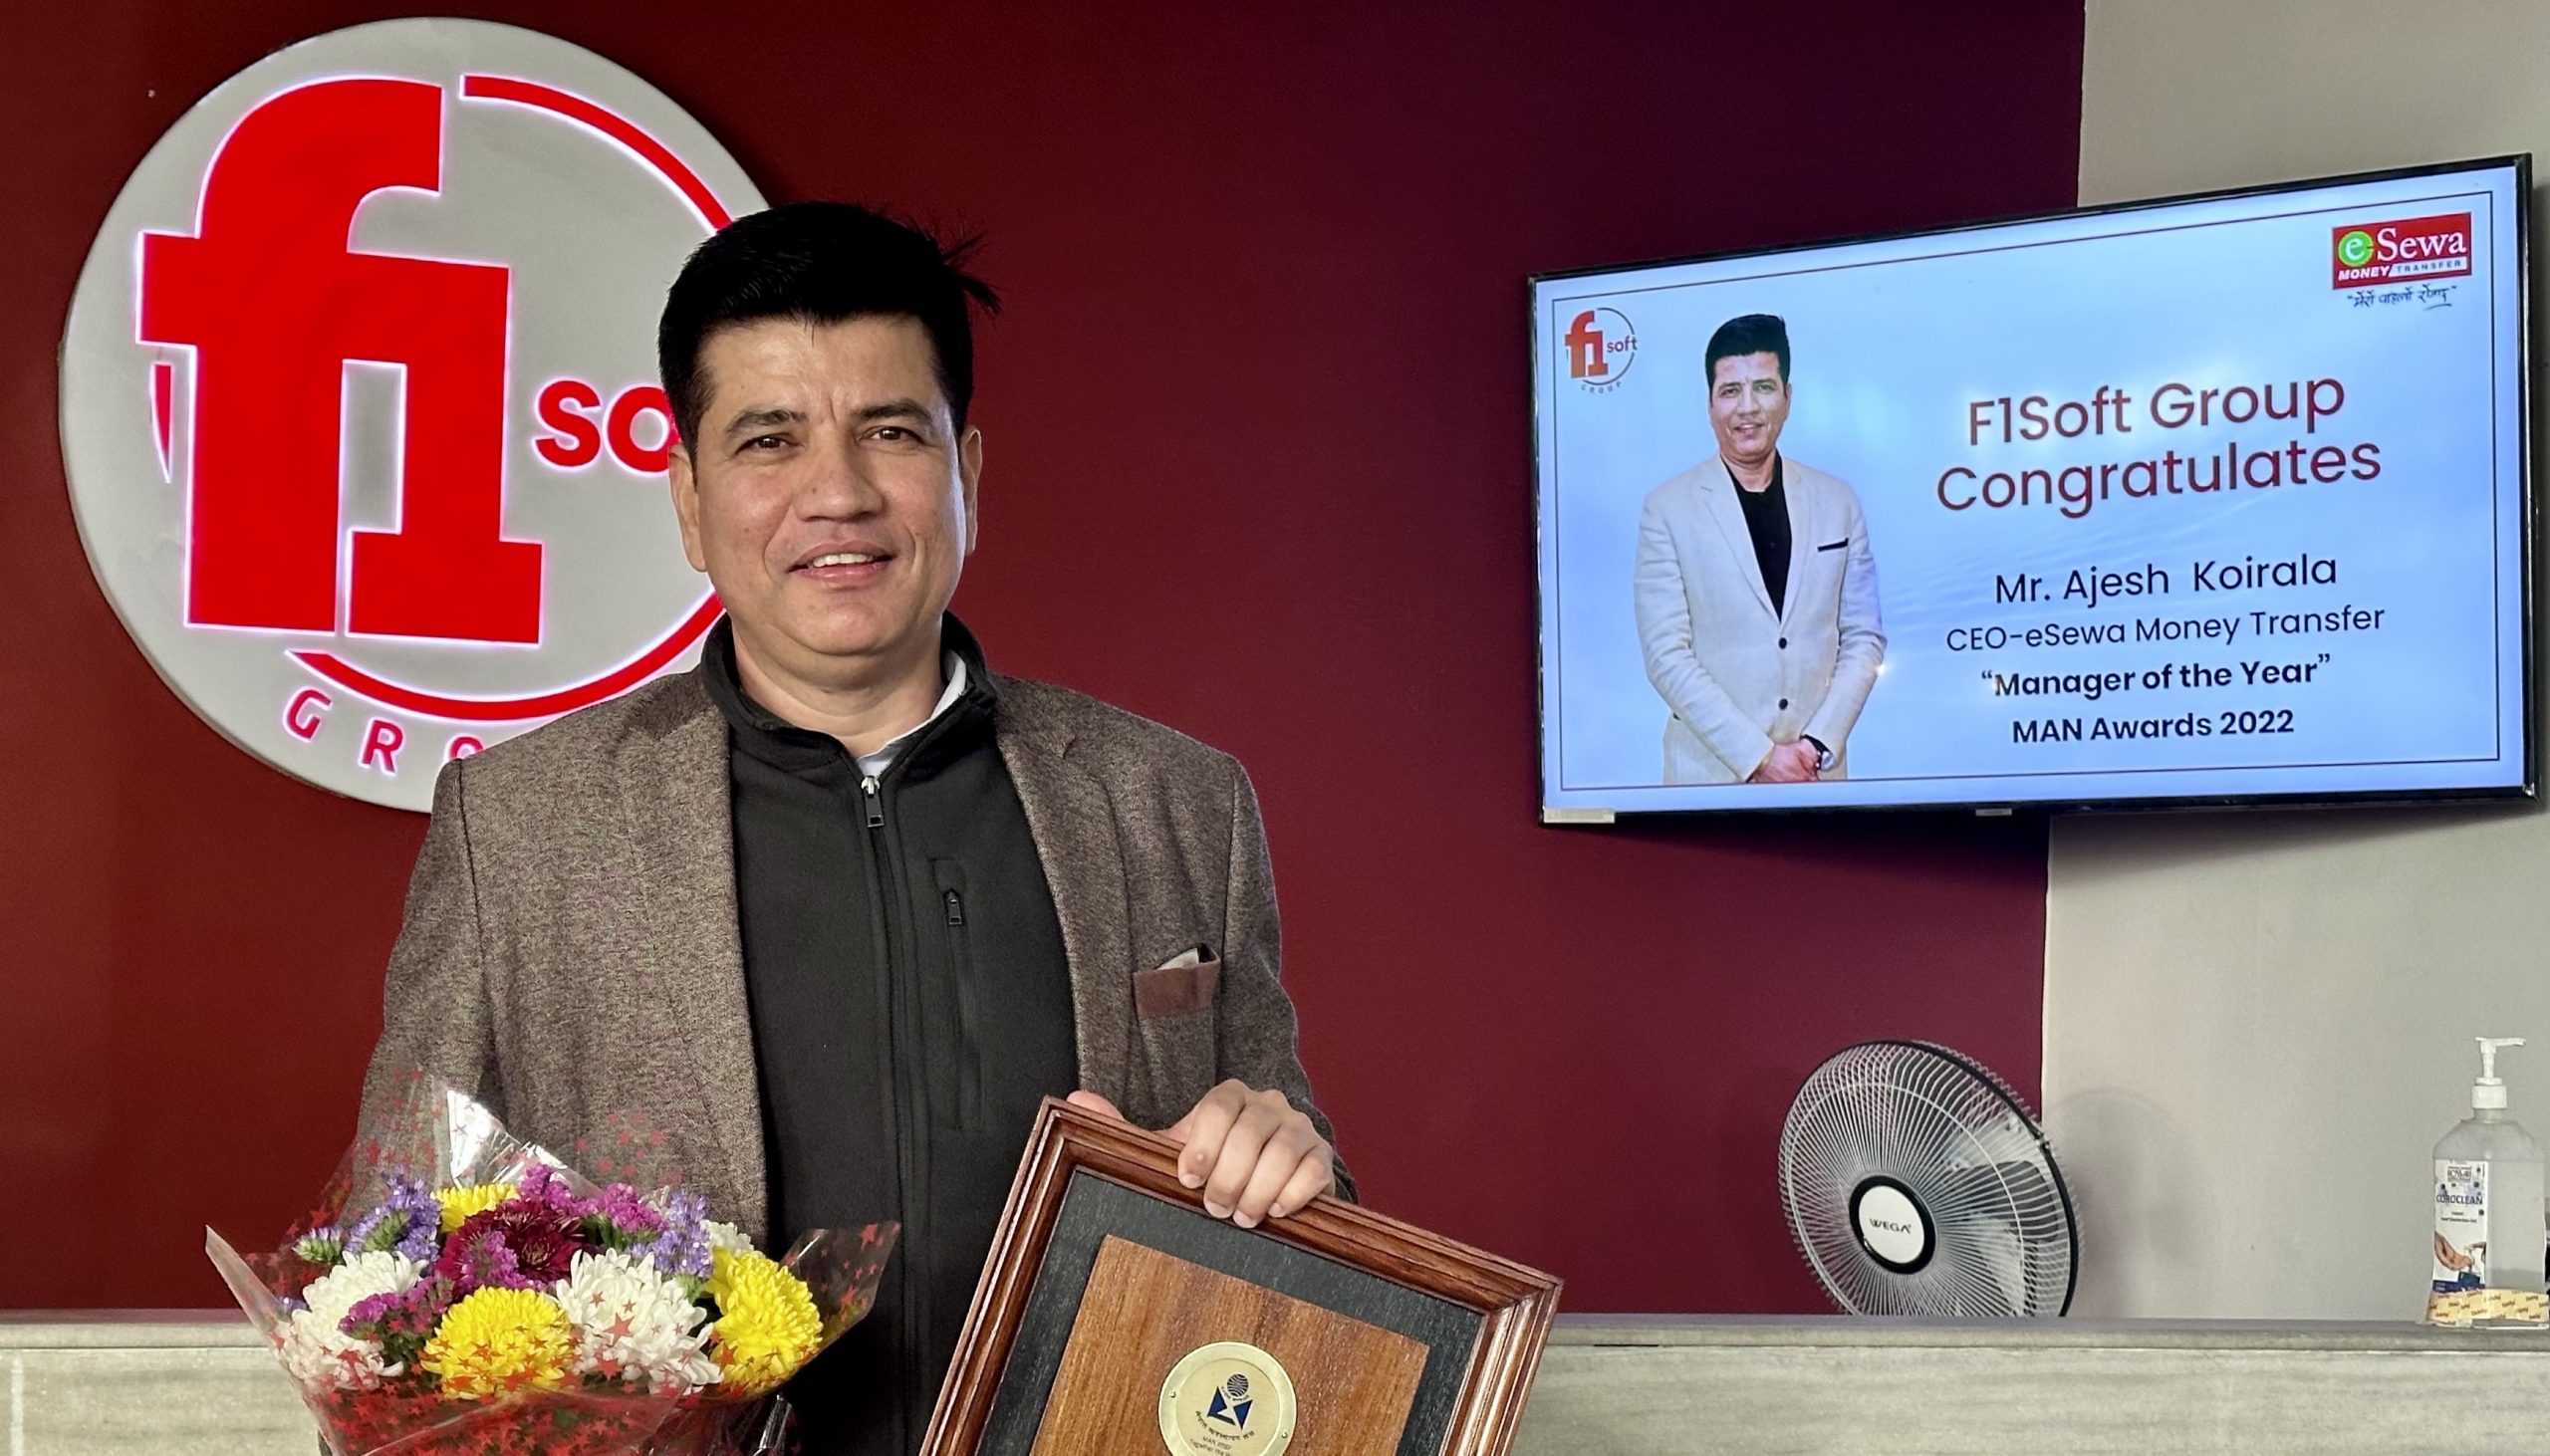 Ajesh Koirala, CEO of eSewa, named Manager of the Year 2022